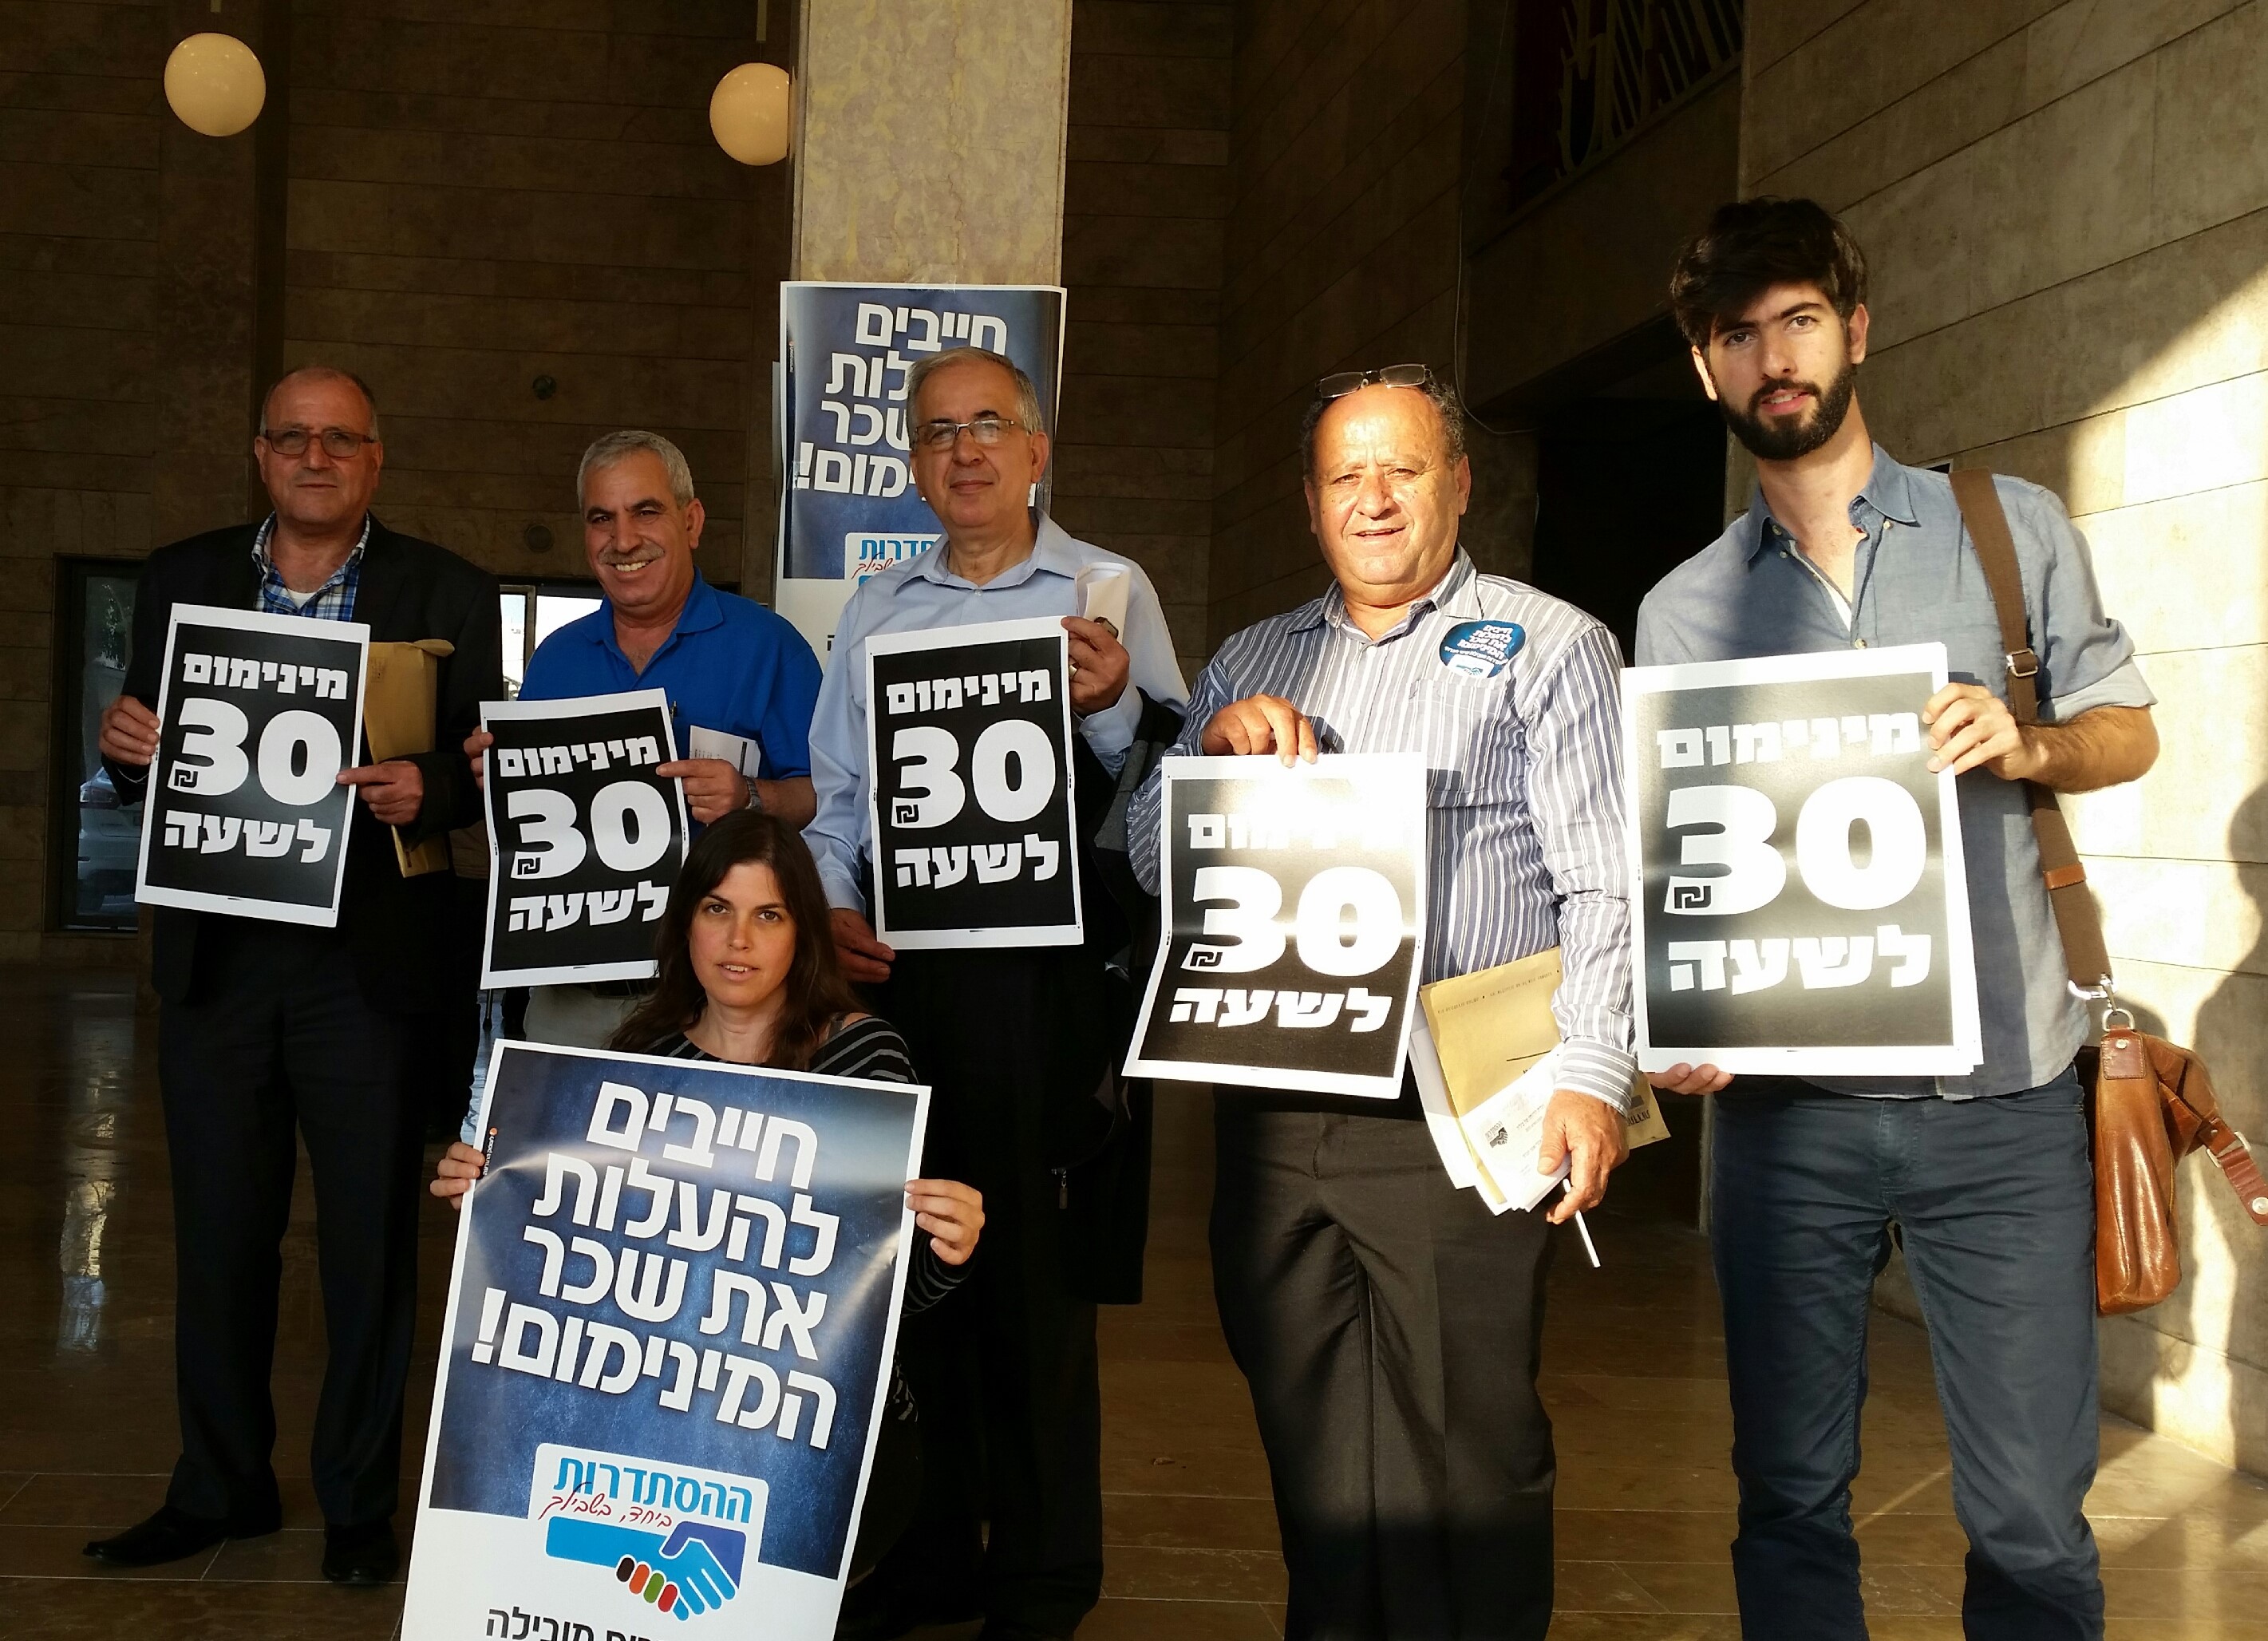 Hadash fraction members at the Histadrut headquarters in Tel-Aviv on Tuesday demanding to raise the minimum wage to 30 NIS an hour  (Photo: Hadash) 